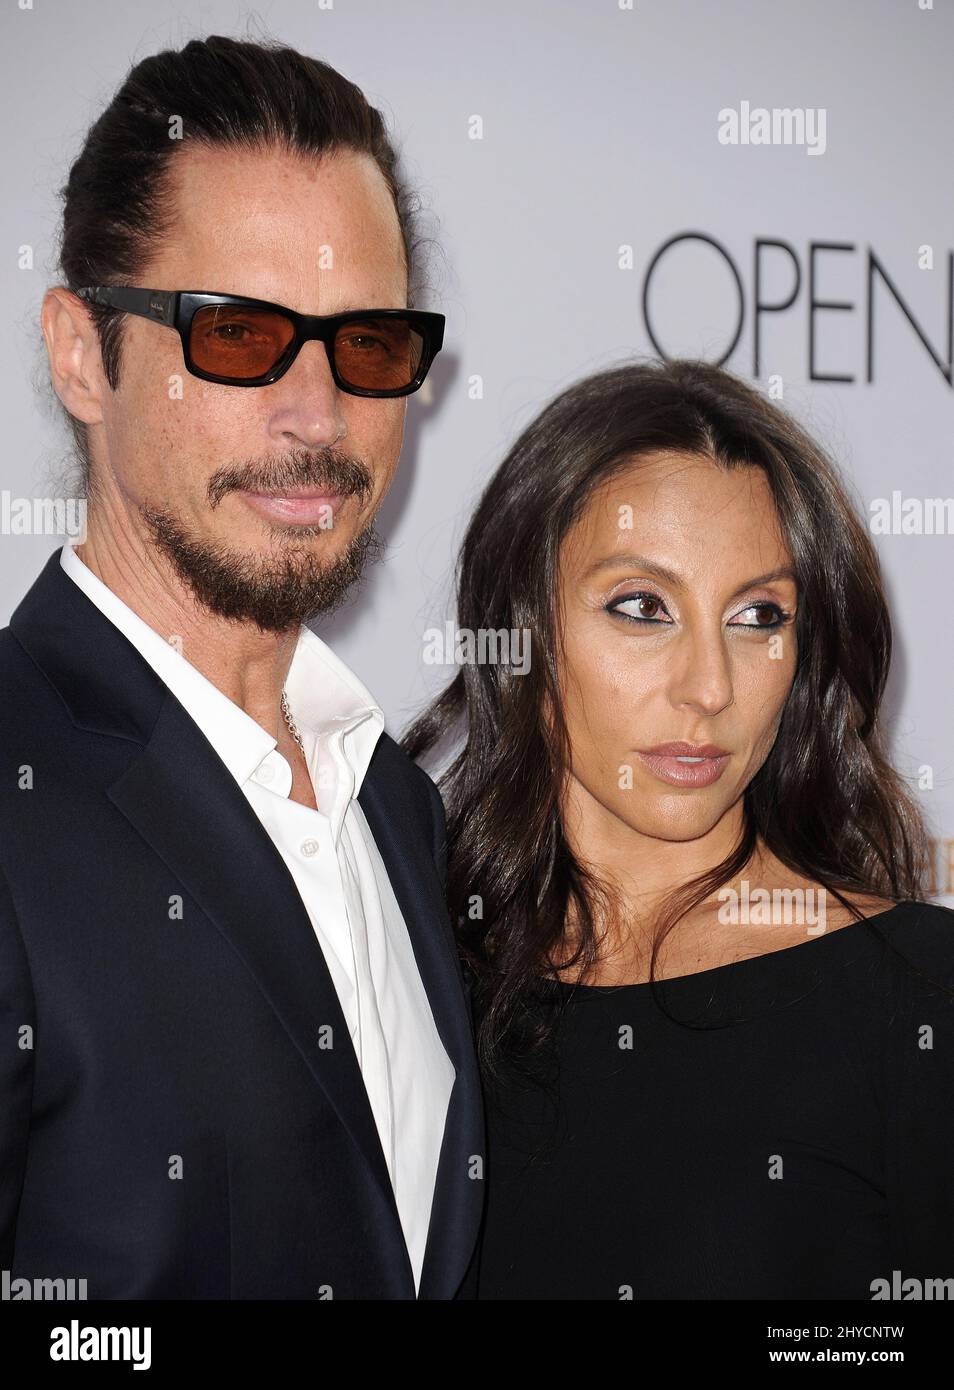 Chris Cornell has died aged 52. Chris Cornell, Vicky Karayiannis attending the premiere of The Promise, held at TCL Chinese Theatre, in Los Angeles, California Stock Photo